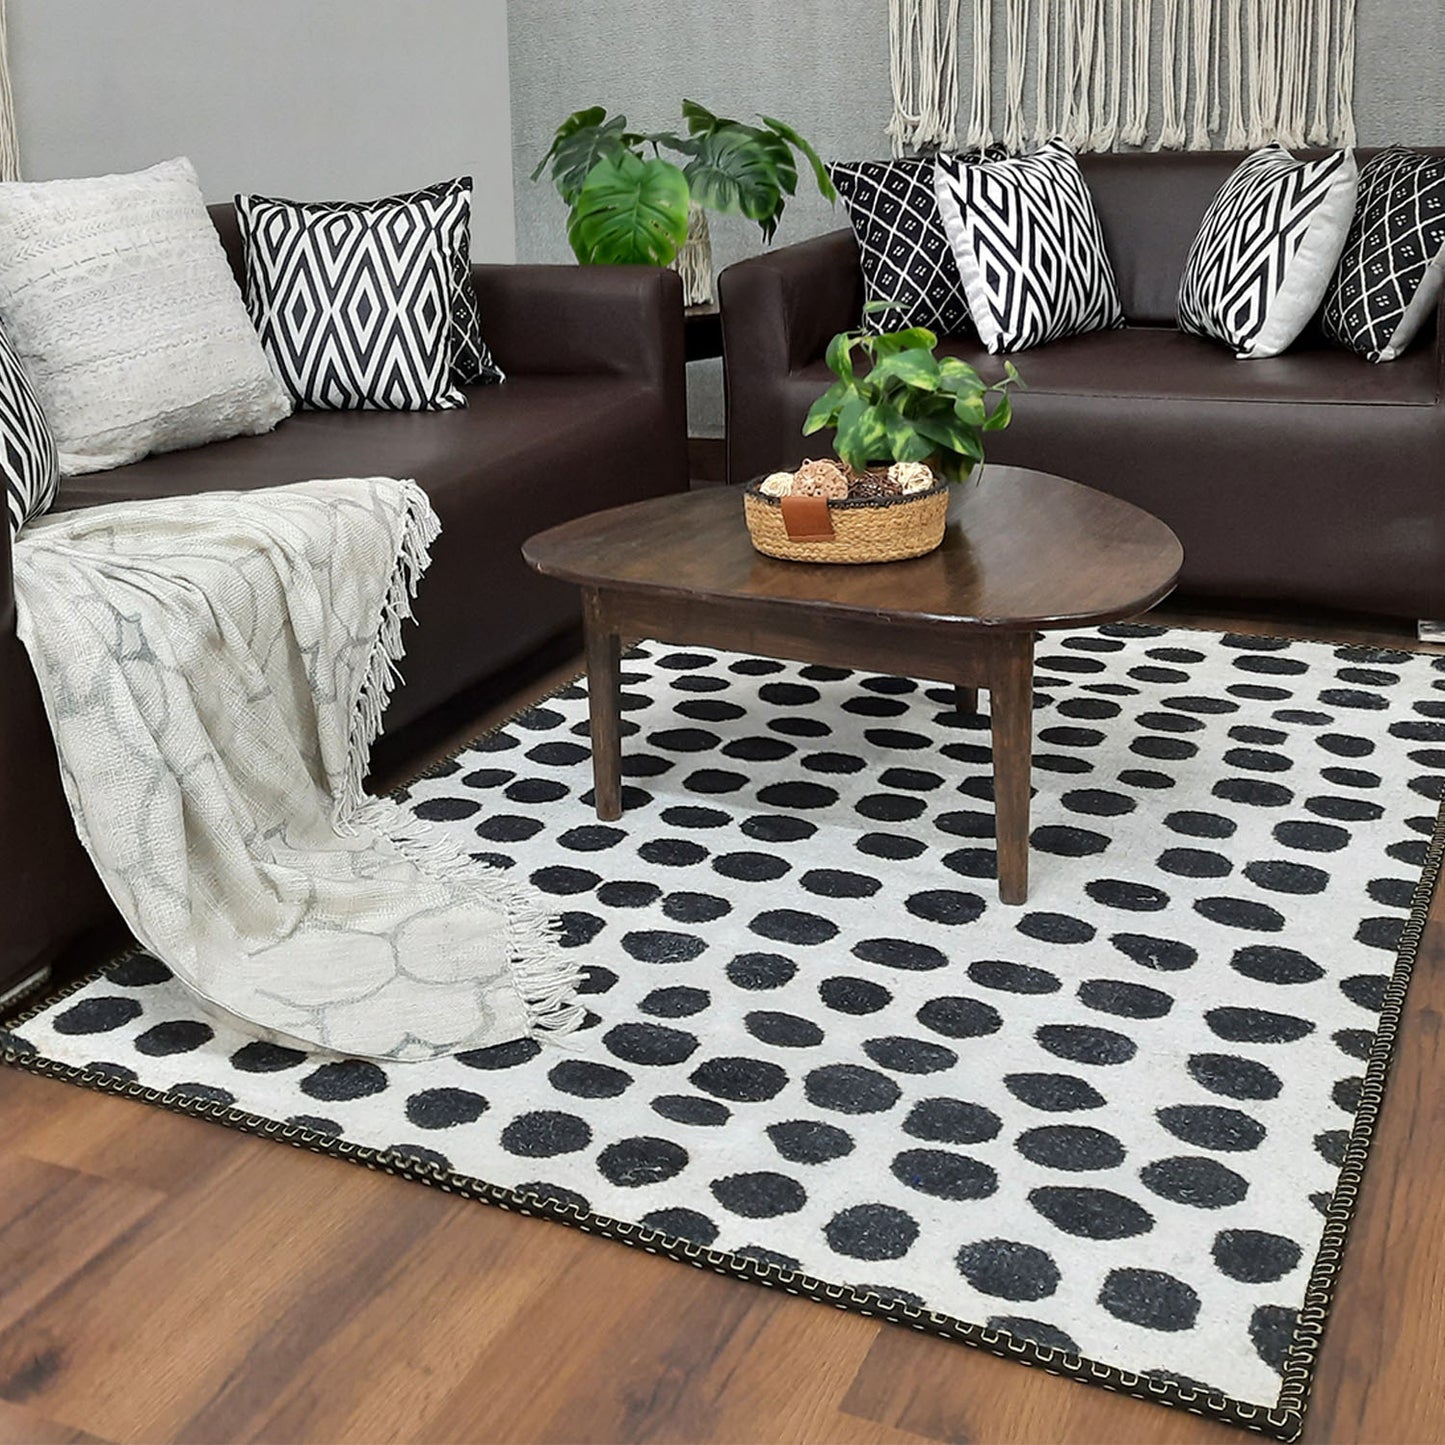 Avioni Faux Silk Carpet for a Stylish and Modern Living Room Monochrome theme | Durable and Washable